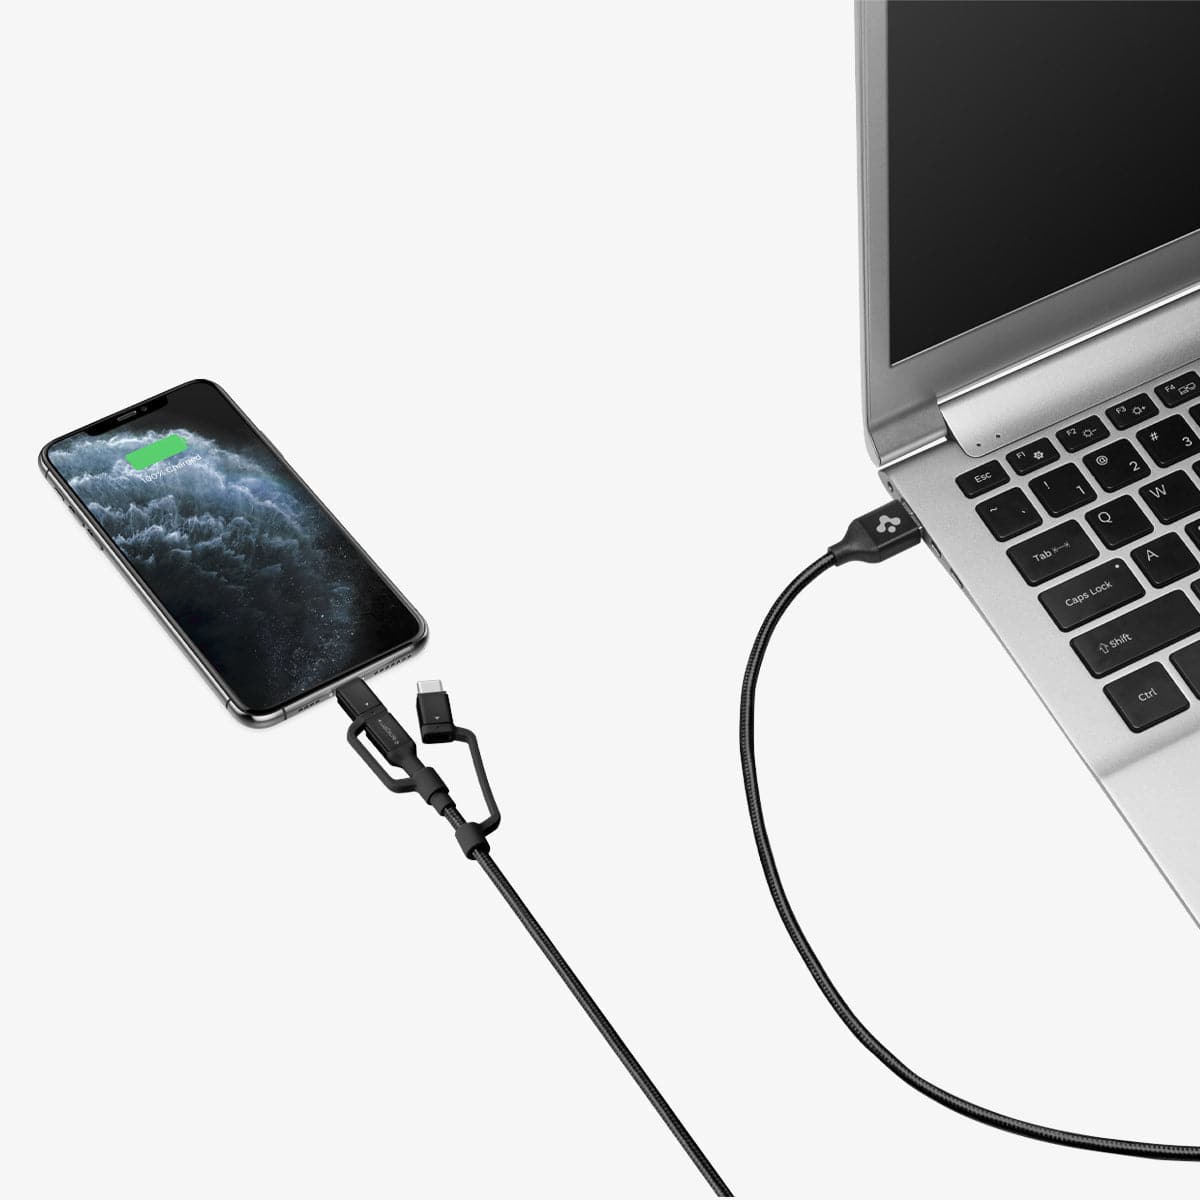 000CB22774 - DuraSync 3-in-1 Charger Cable in black showing the cable plugged into a laptop and charging a device